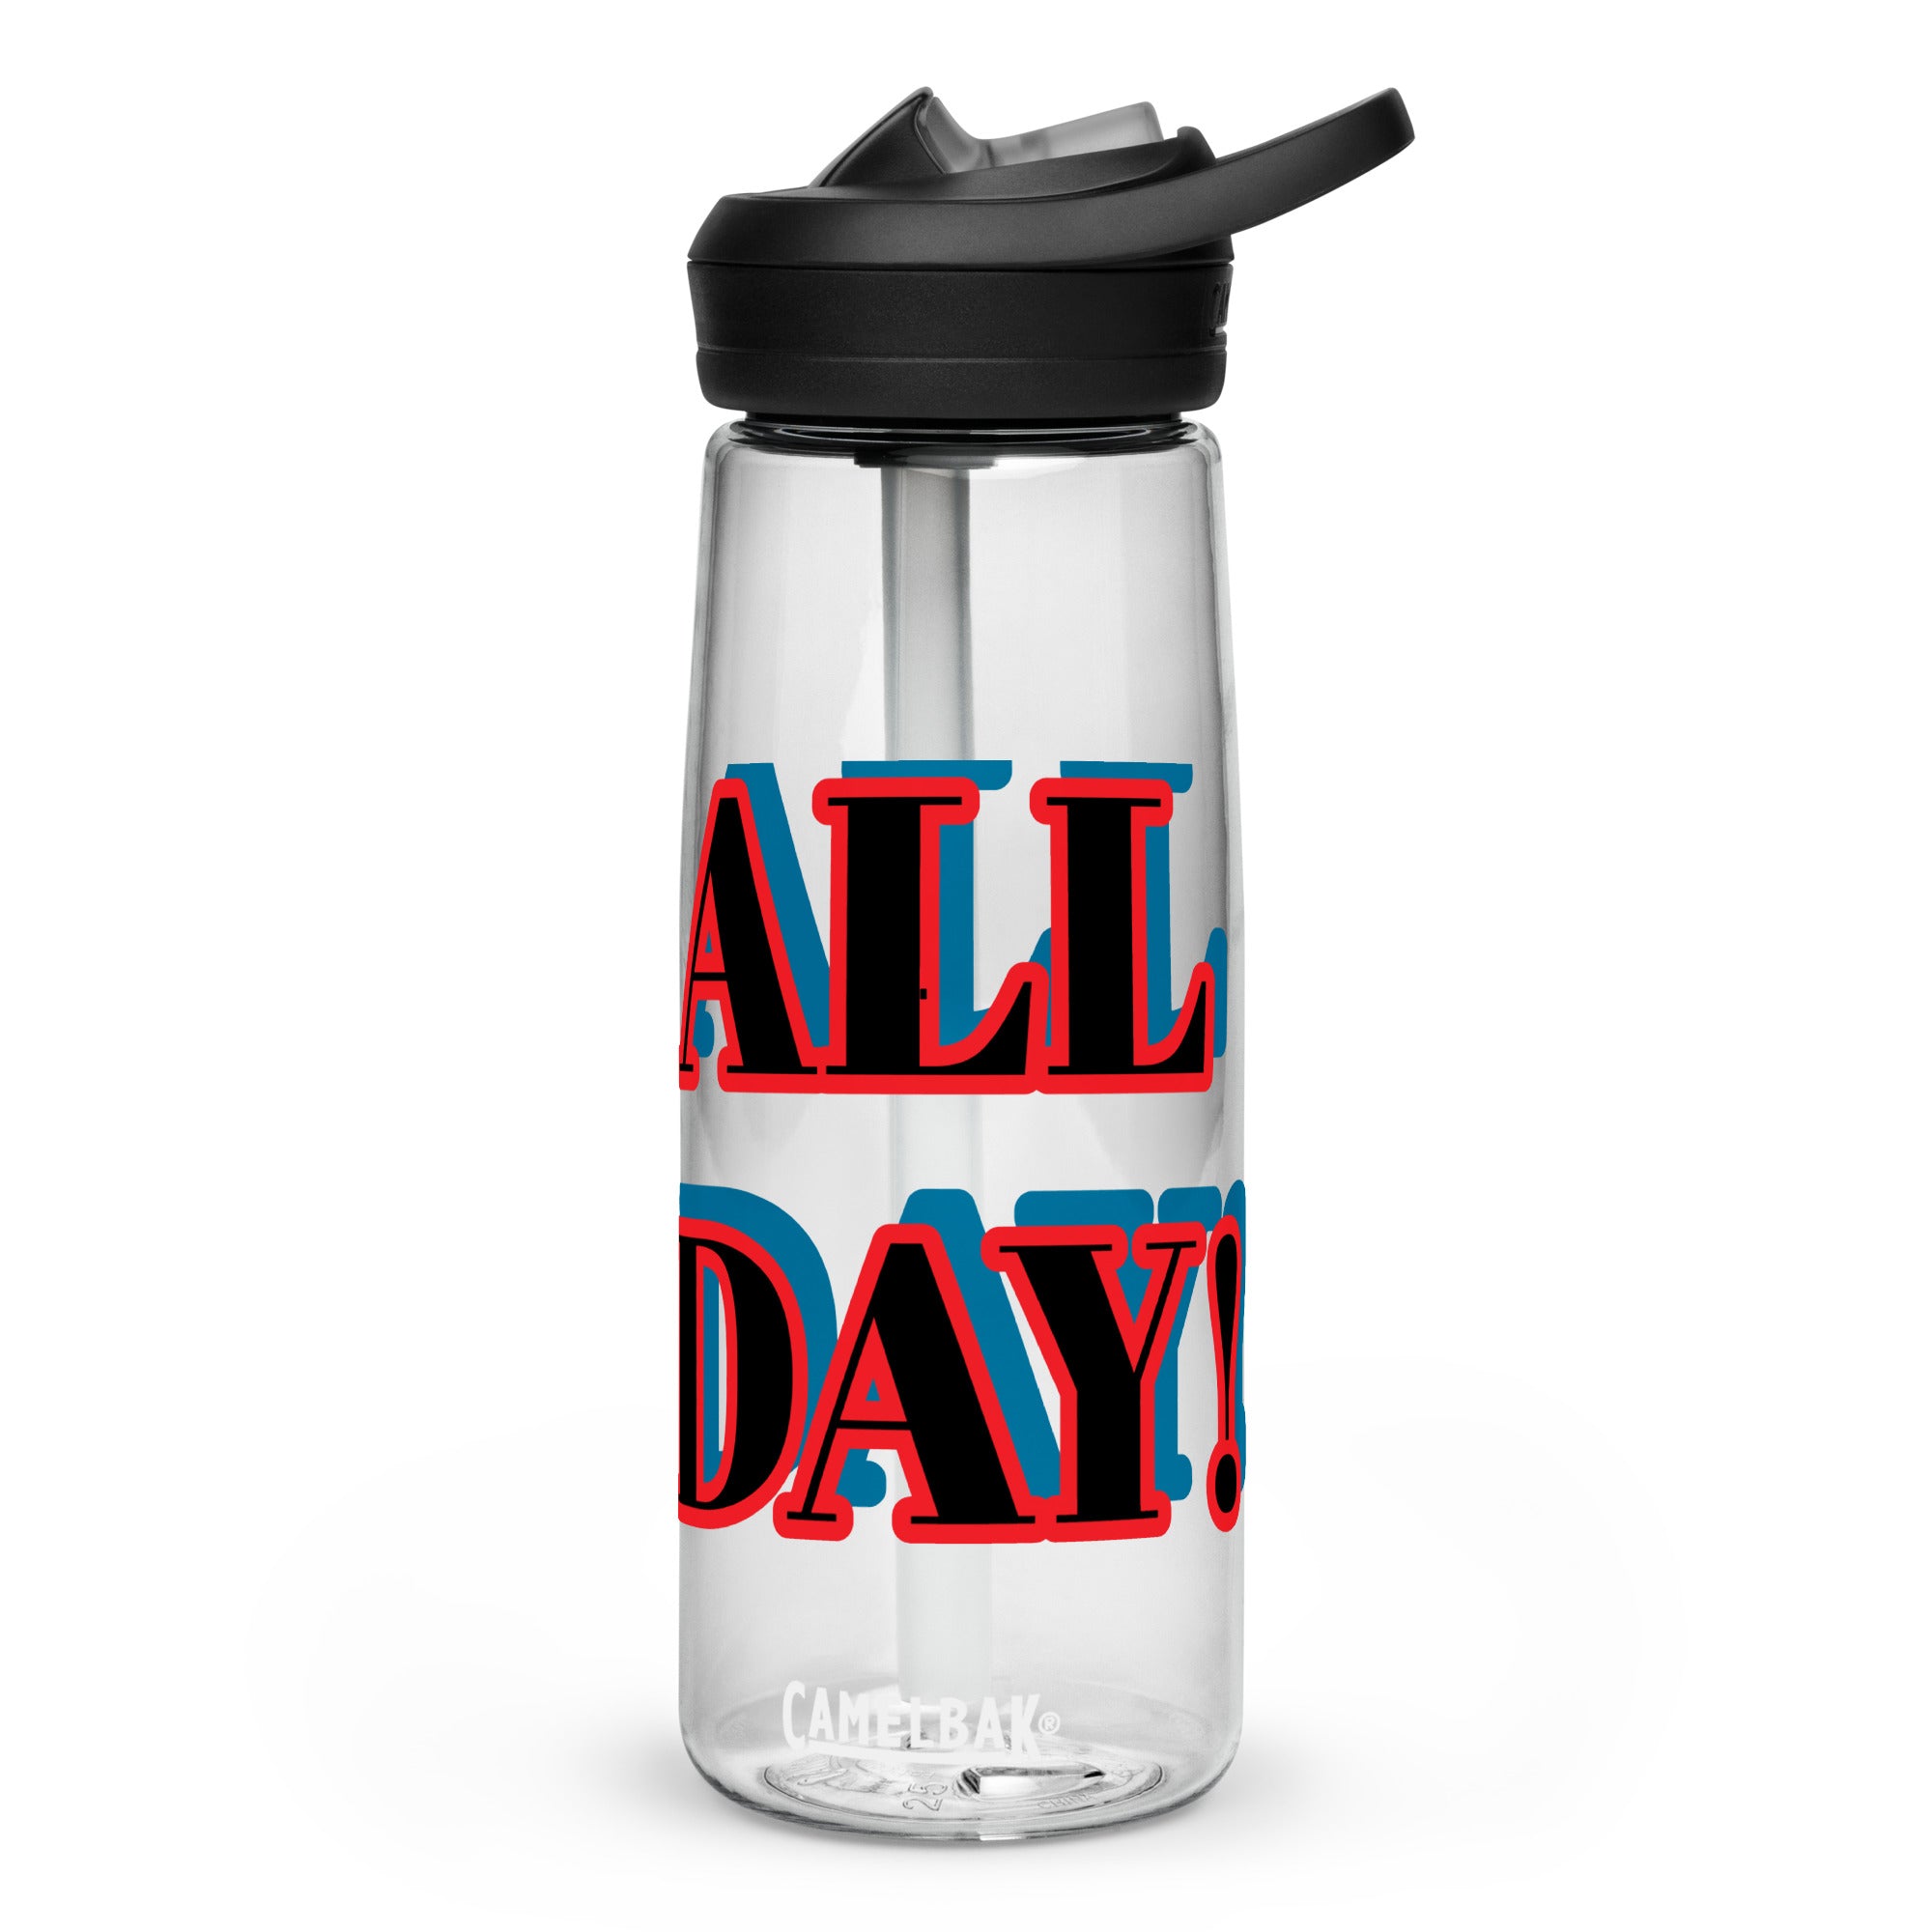 Sports water bottle, gym, outdoor